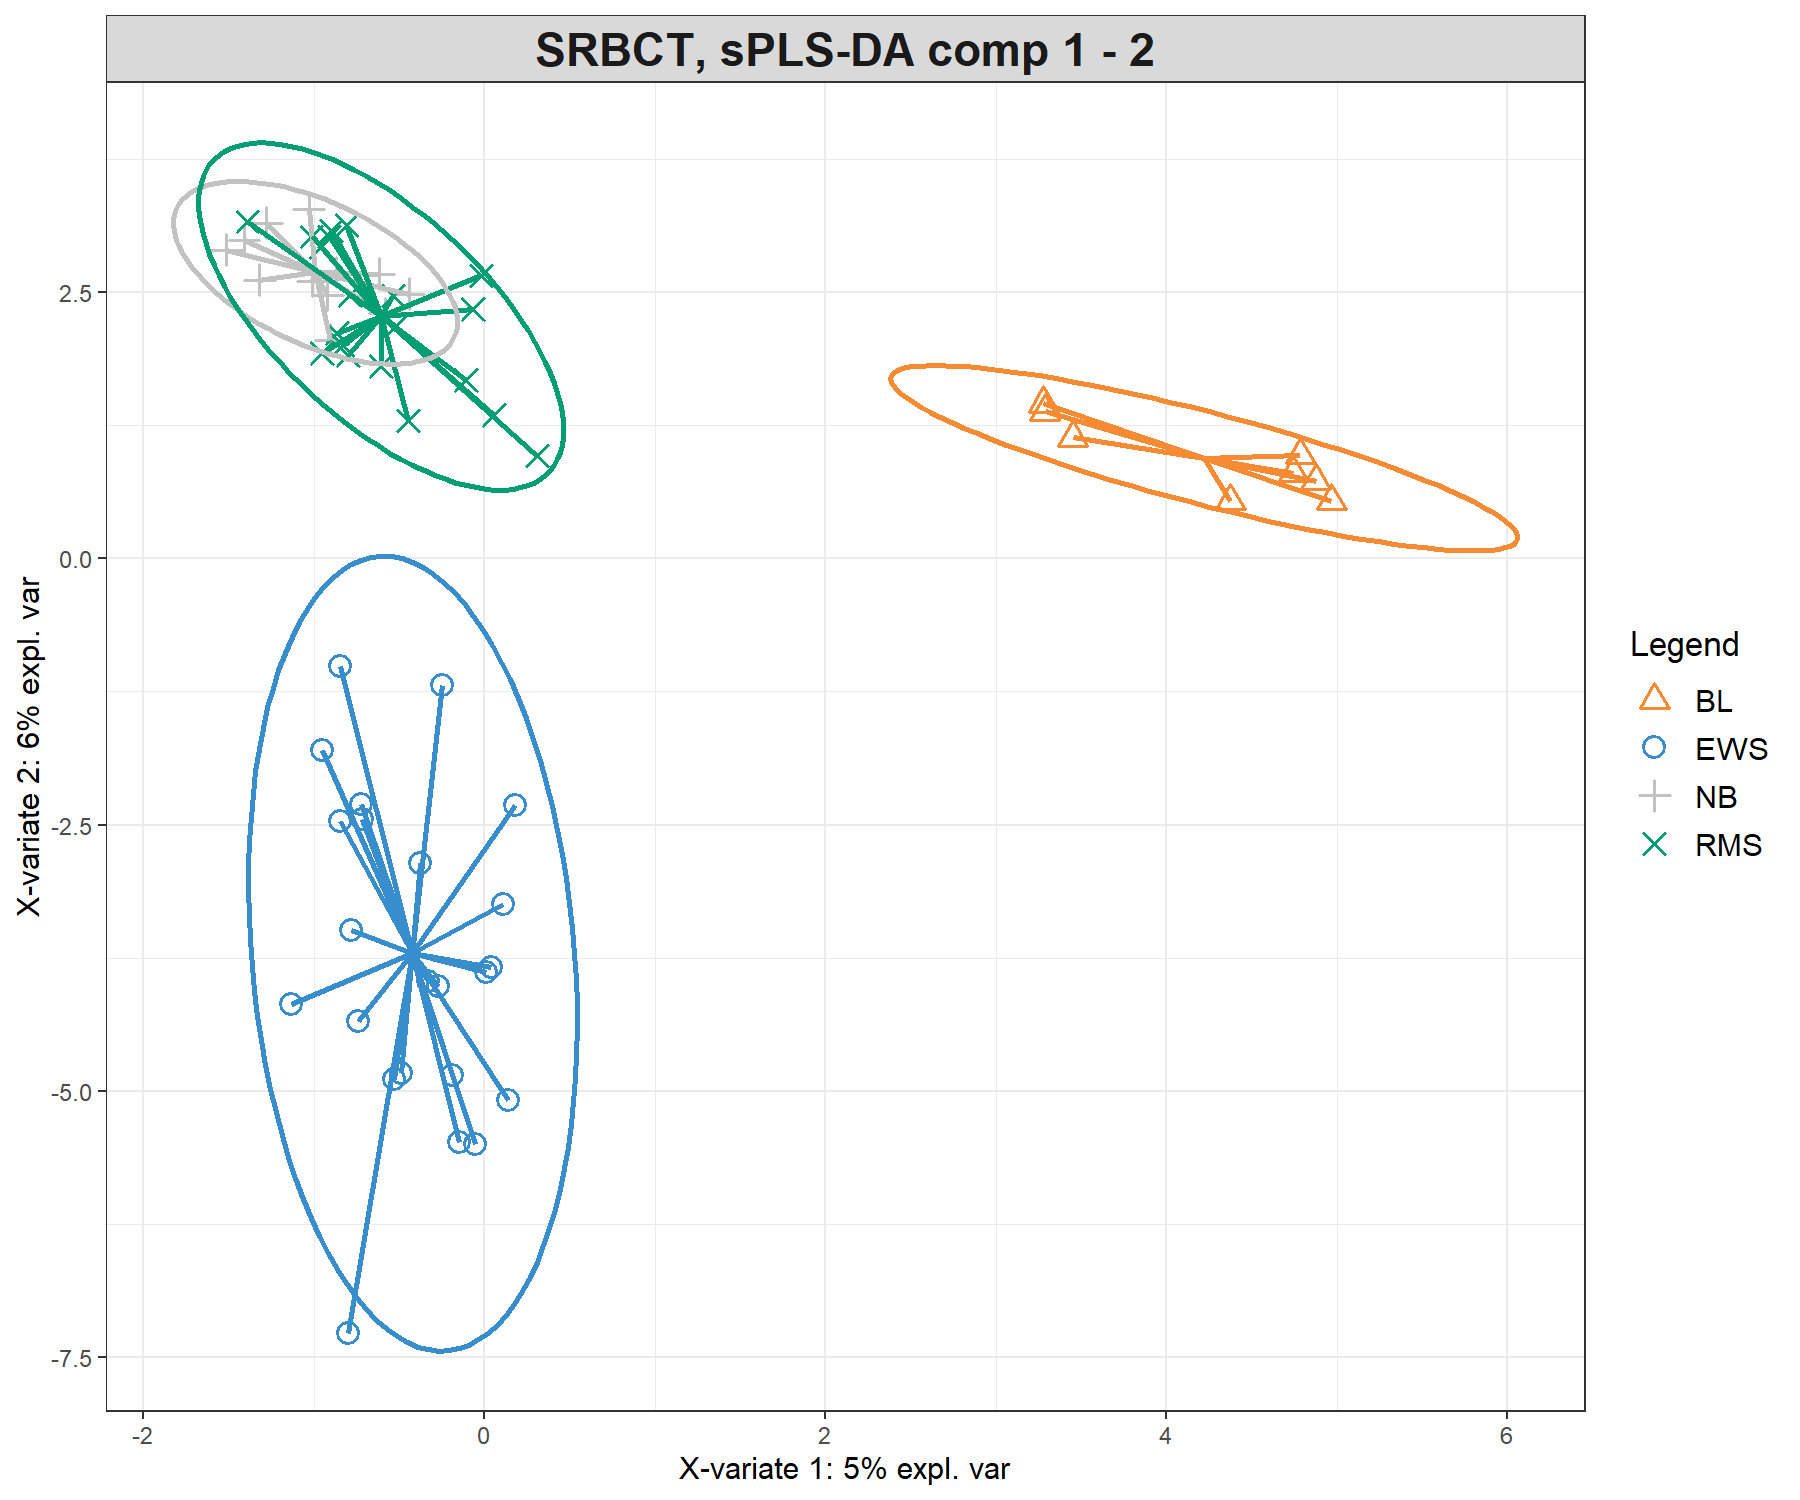 Sample plots from the sPLS-DA performed on the SRBCT gene expression data. Samples are projected into the space spanned by the first three components. The plots represent 95% ellipse confidence intervals around each sample class. The start of each arrow represents the centroid of each class in the space spanned by the components. (a) Components 1 and 2 and (b) Components 2 and 3. Samples are coloured by their tumour subtype. Component 1 discriminates BL vs. the rest, component 2 discriminates EWS vs. the rest, while component 3 further discriminates NB vs. RMS vs. the rest. The combination of all three components enables us to discriminate all classes.